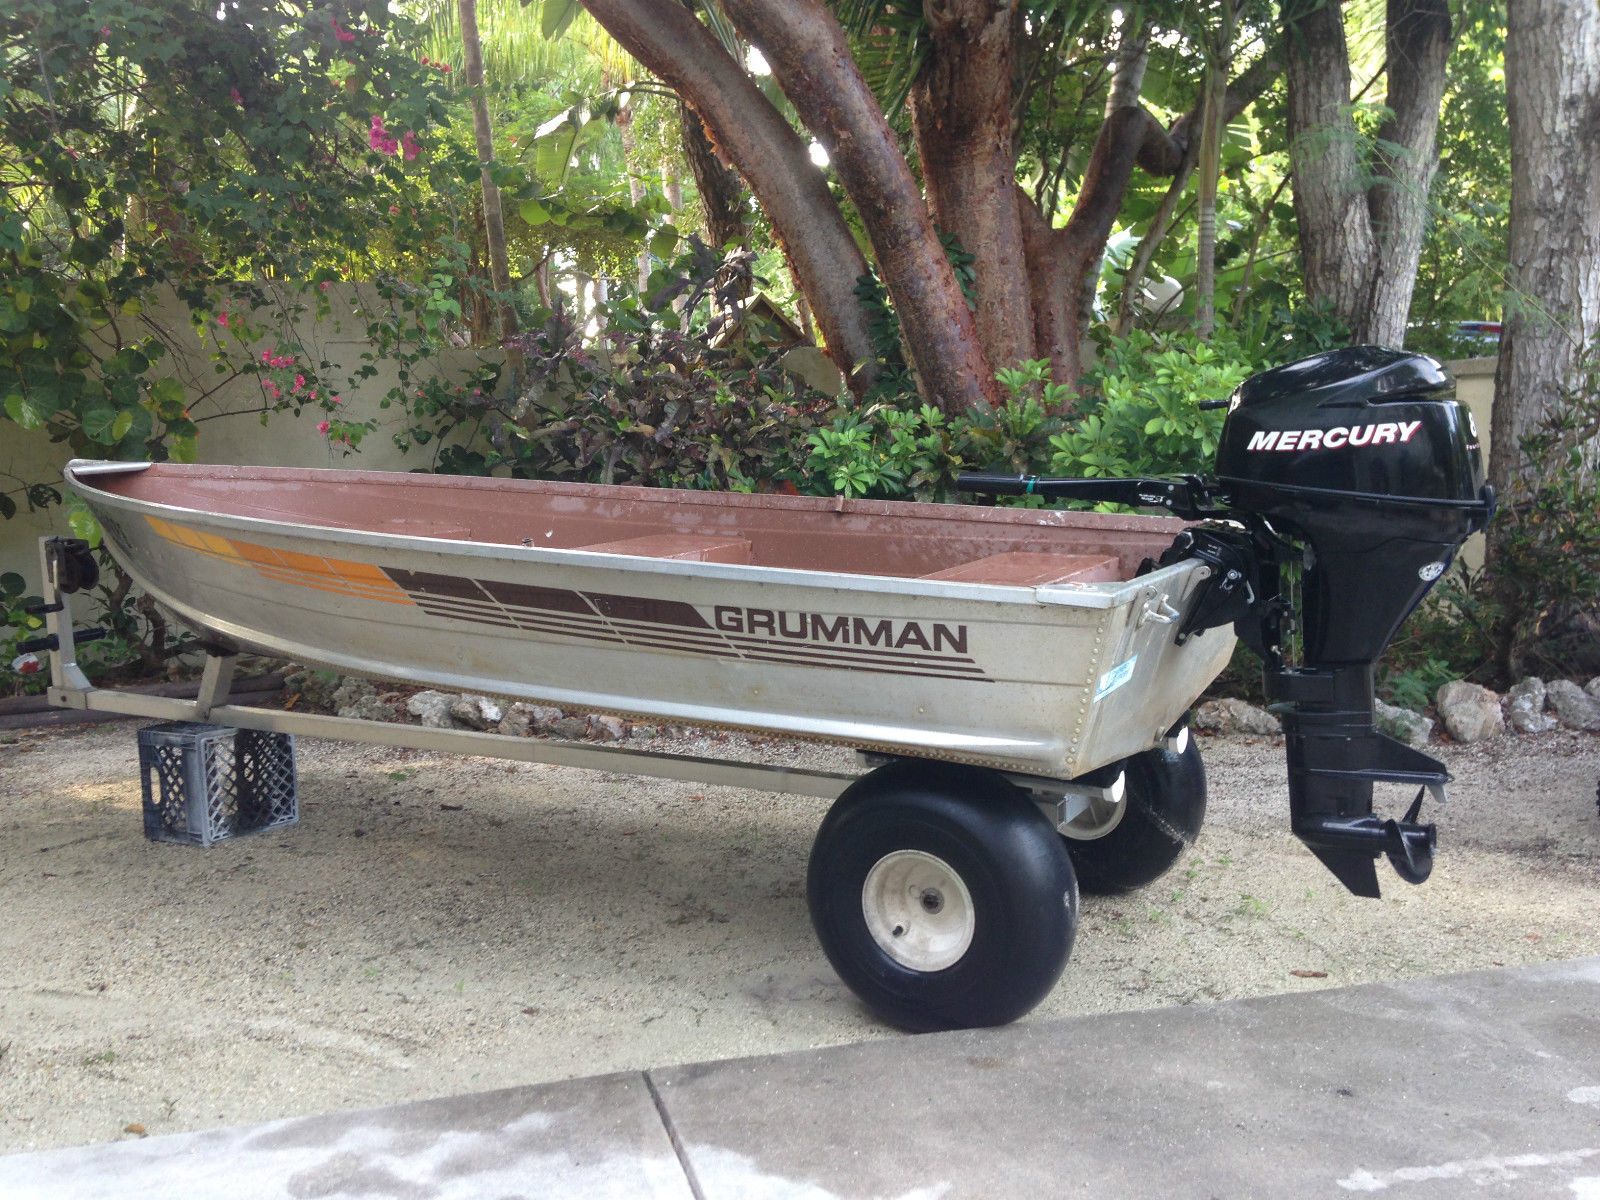 Grumman Cartopper 1984 for sale for $1,750 - Boats-from ...